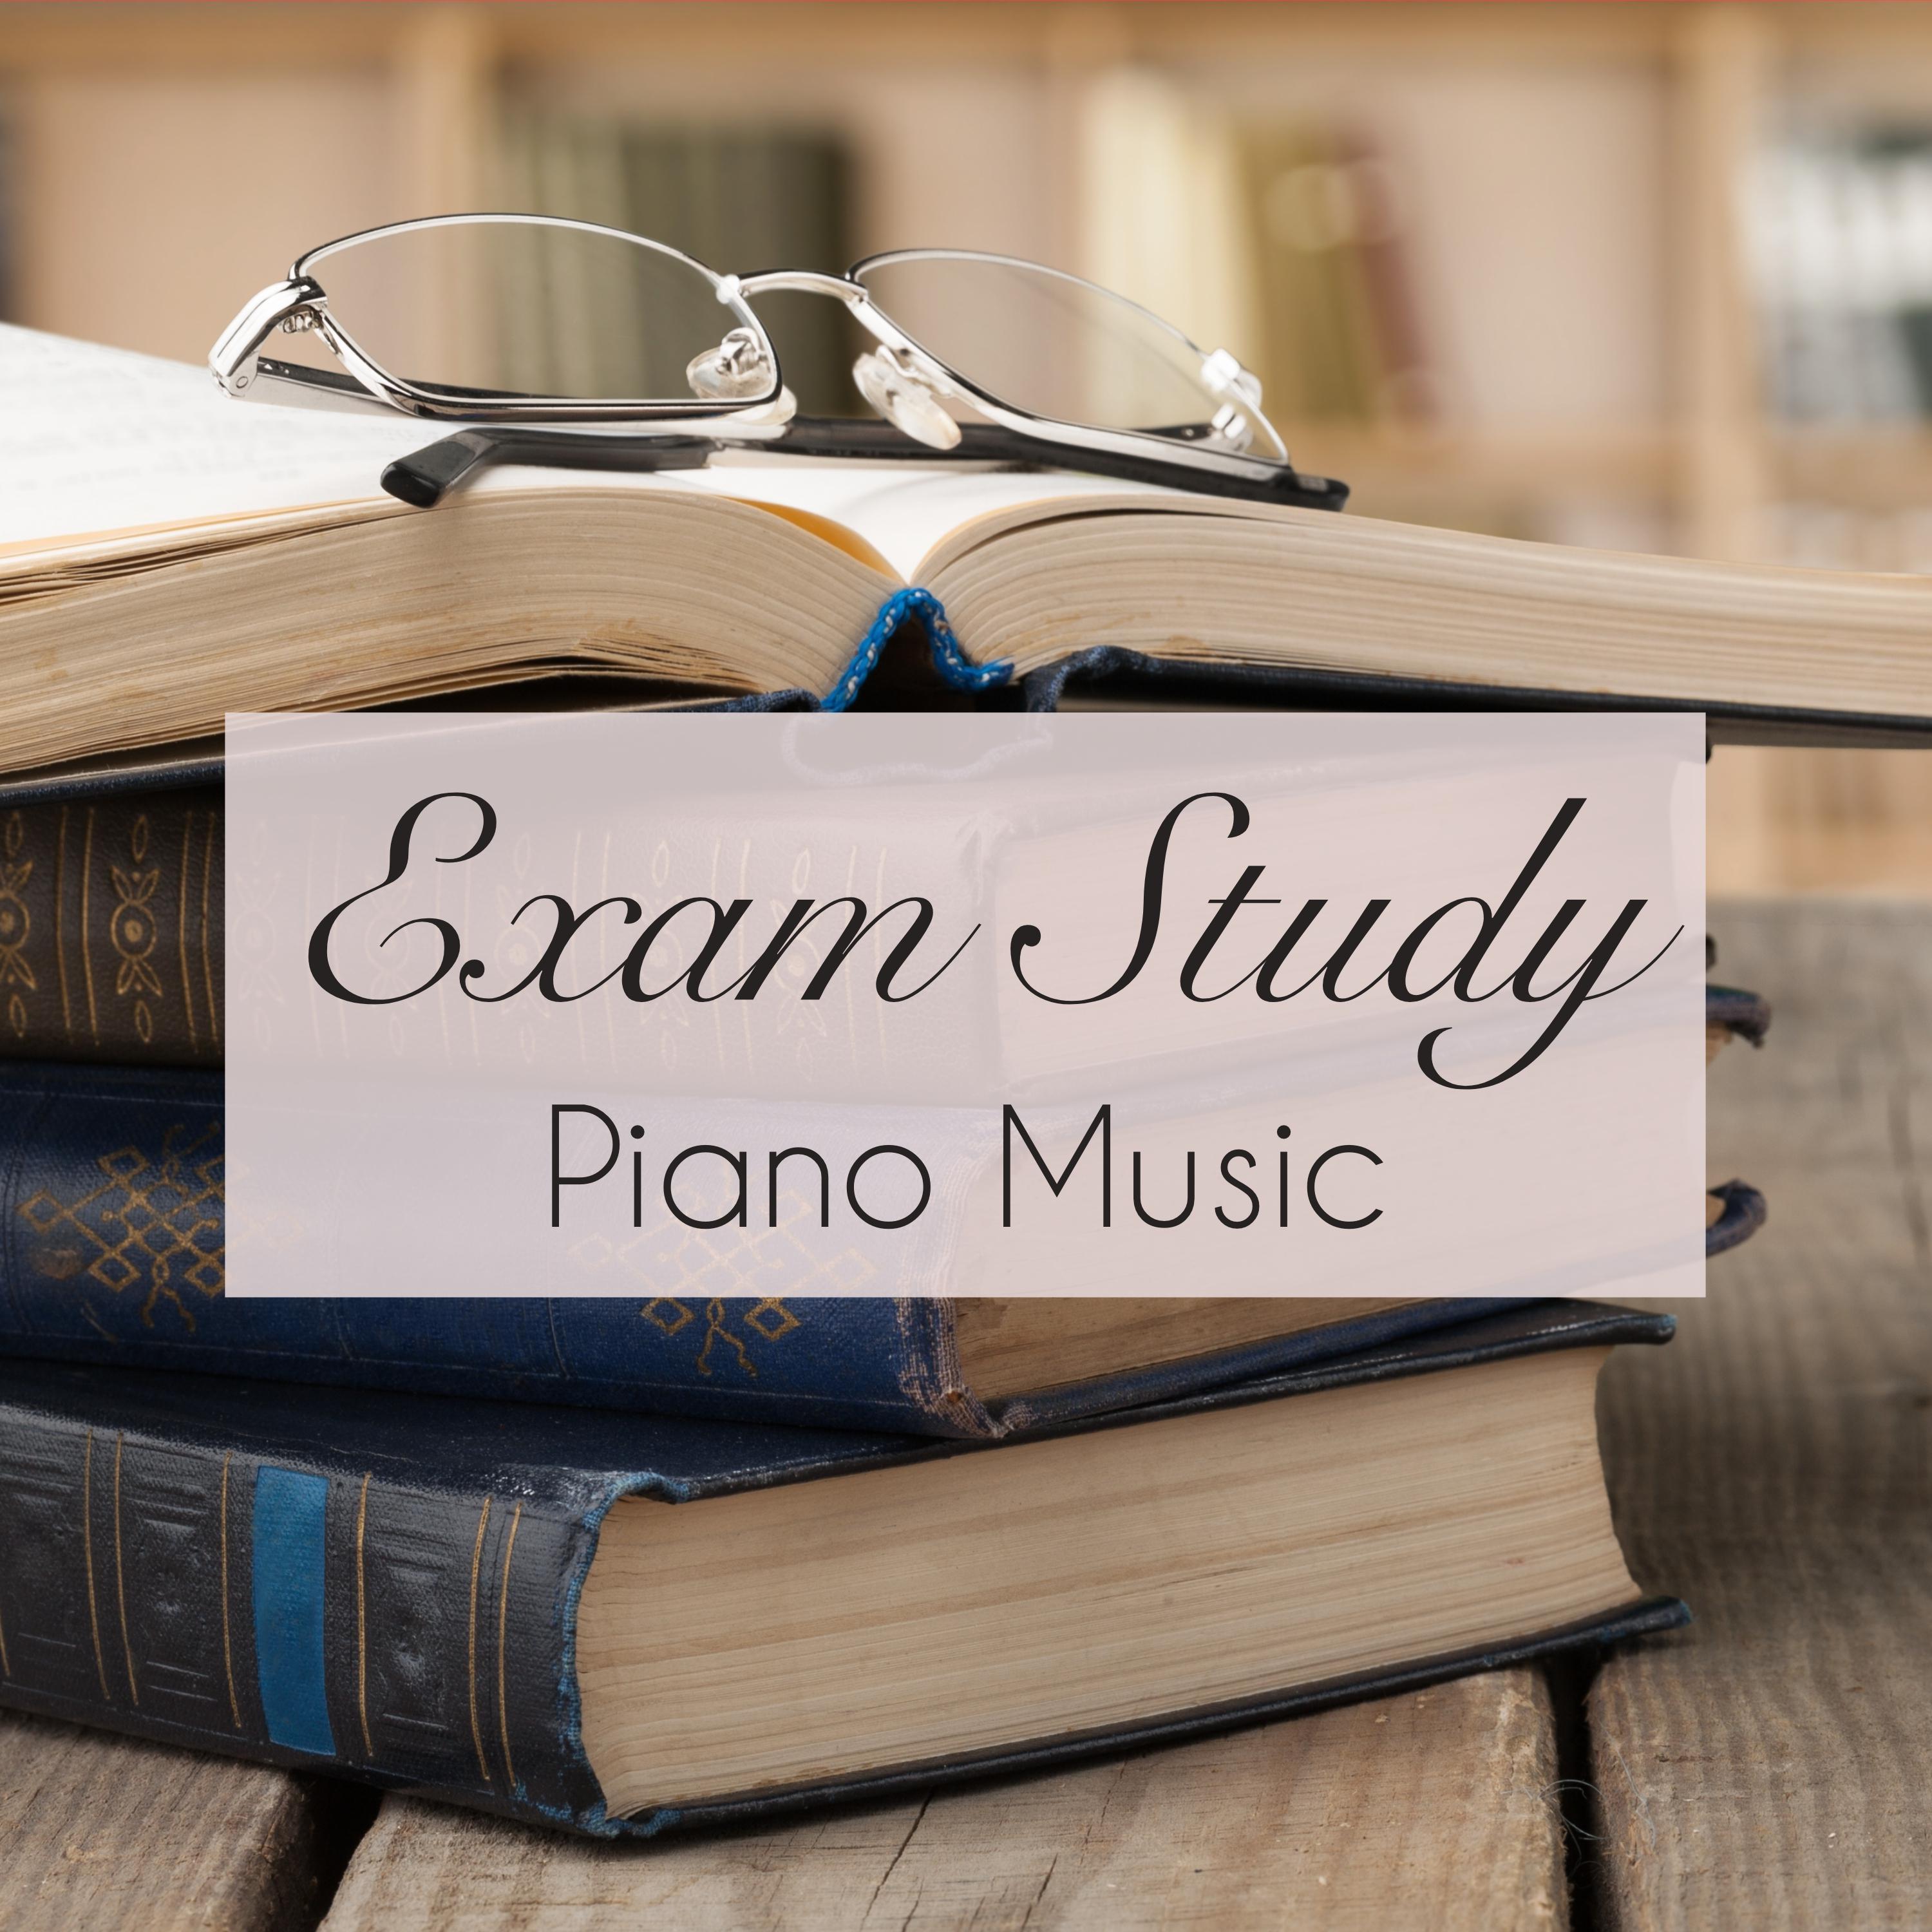 Exam Study Piano Music – Increase your Concentration & Get Smarter Listening Good Instrumental Piano Music